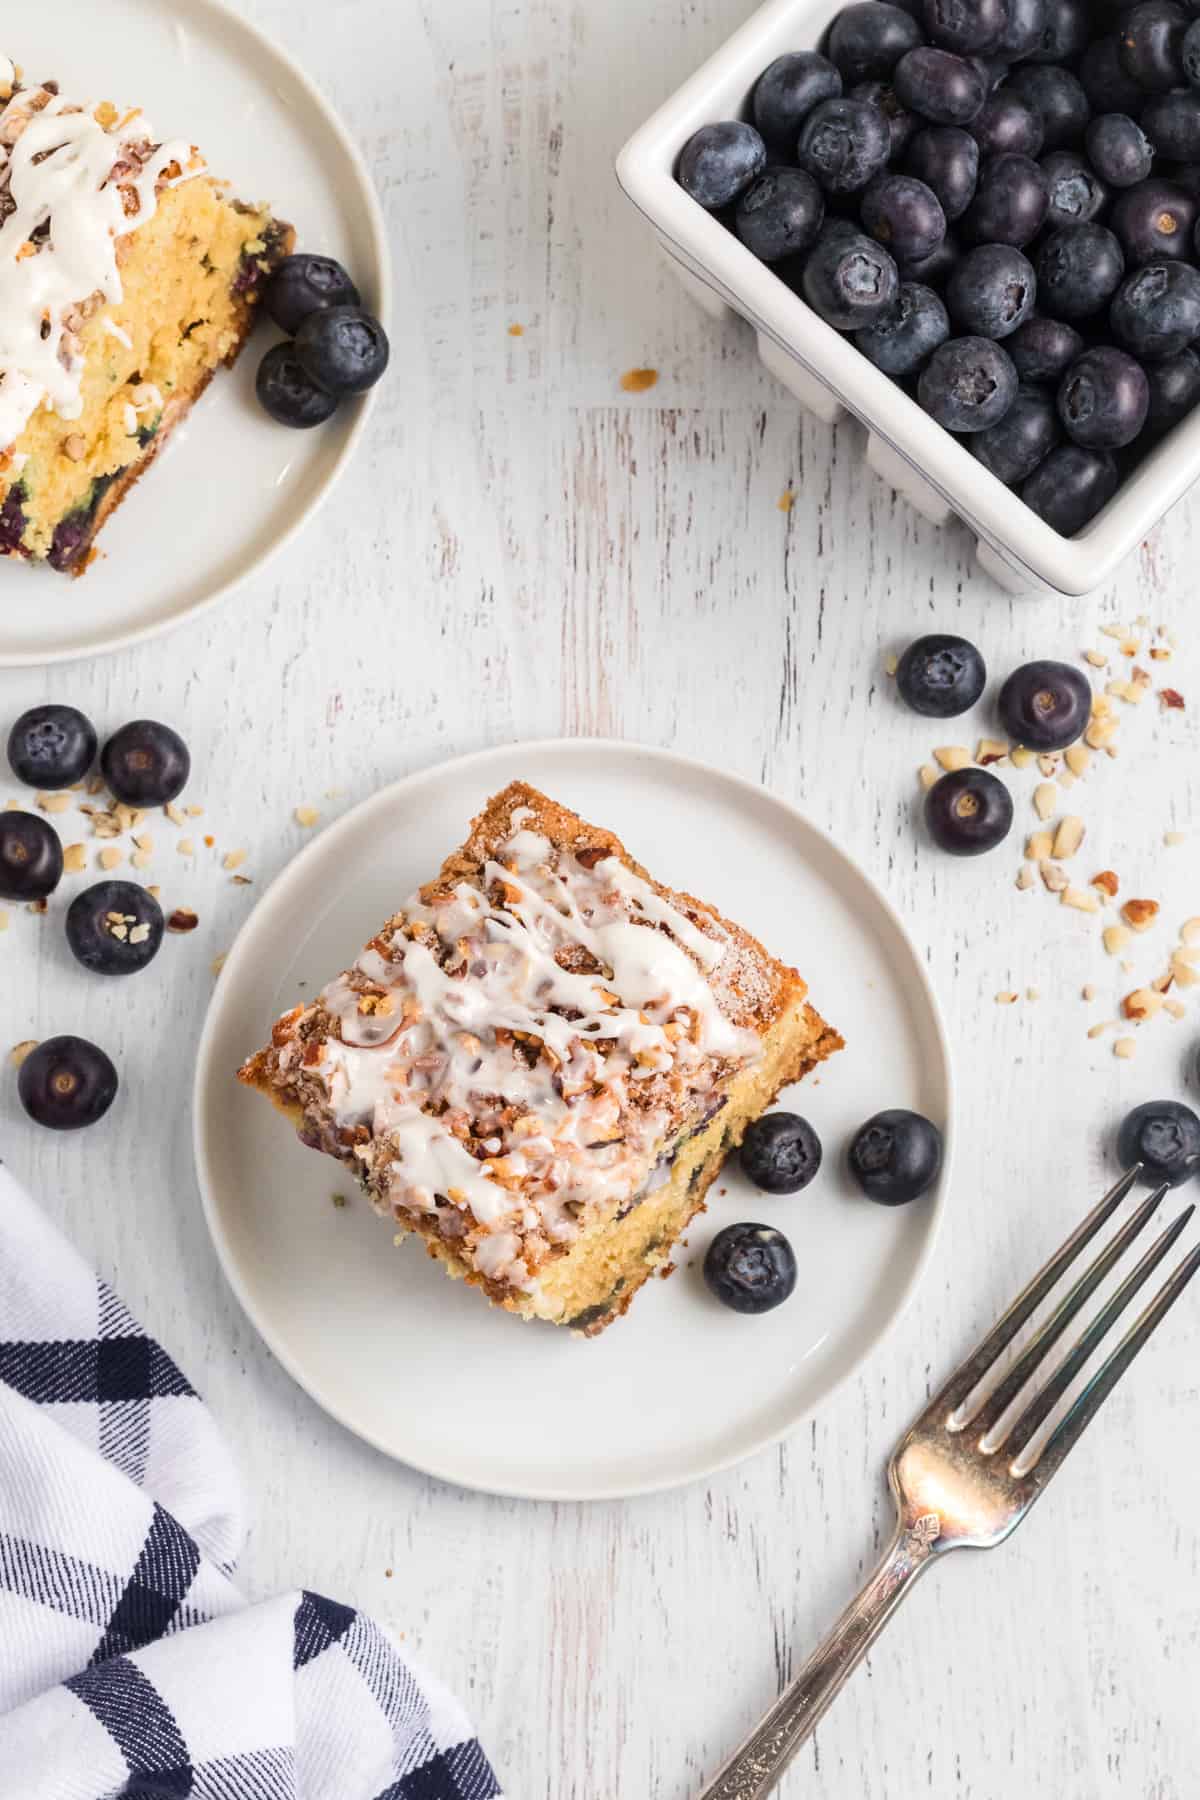 Two plates with servings of cake are placed next to a container of fresh blueberries.